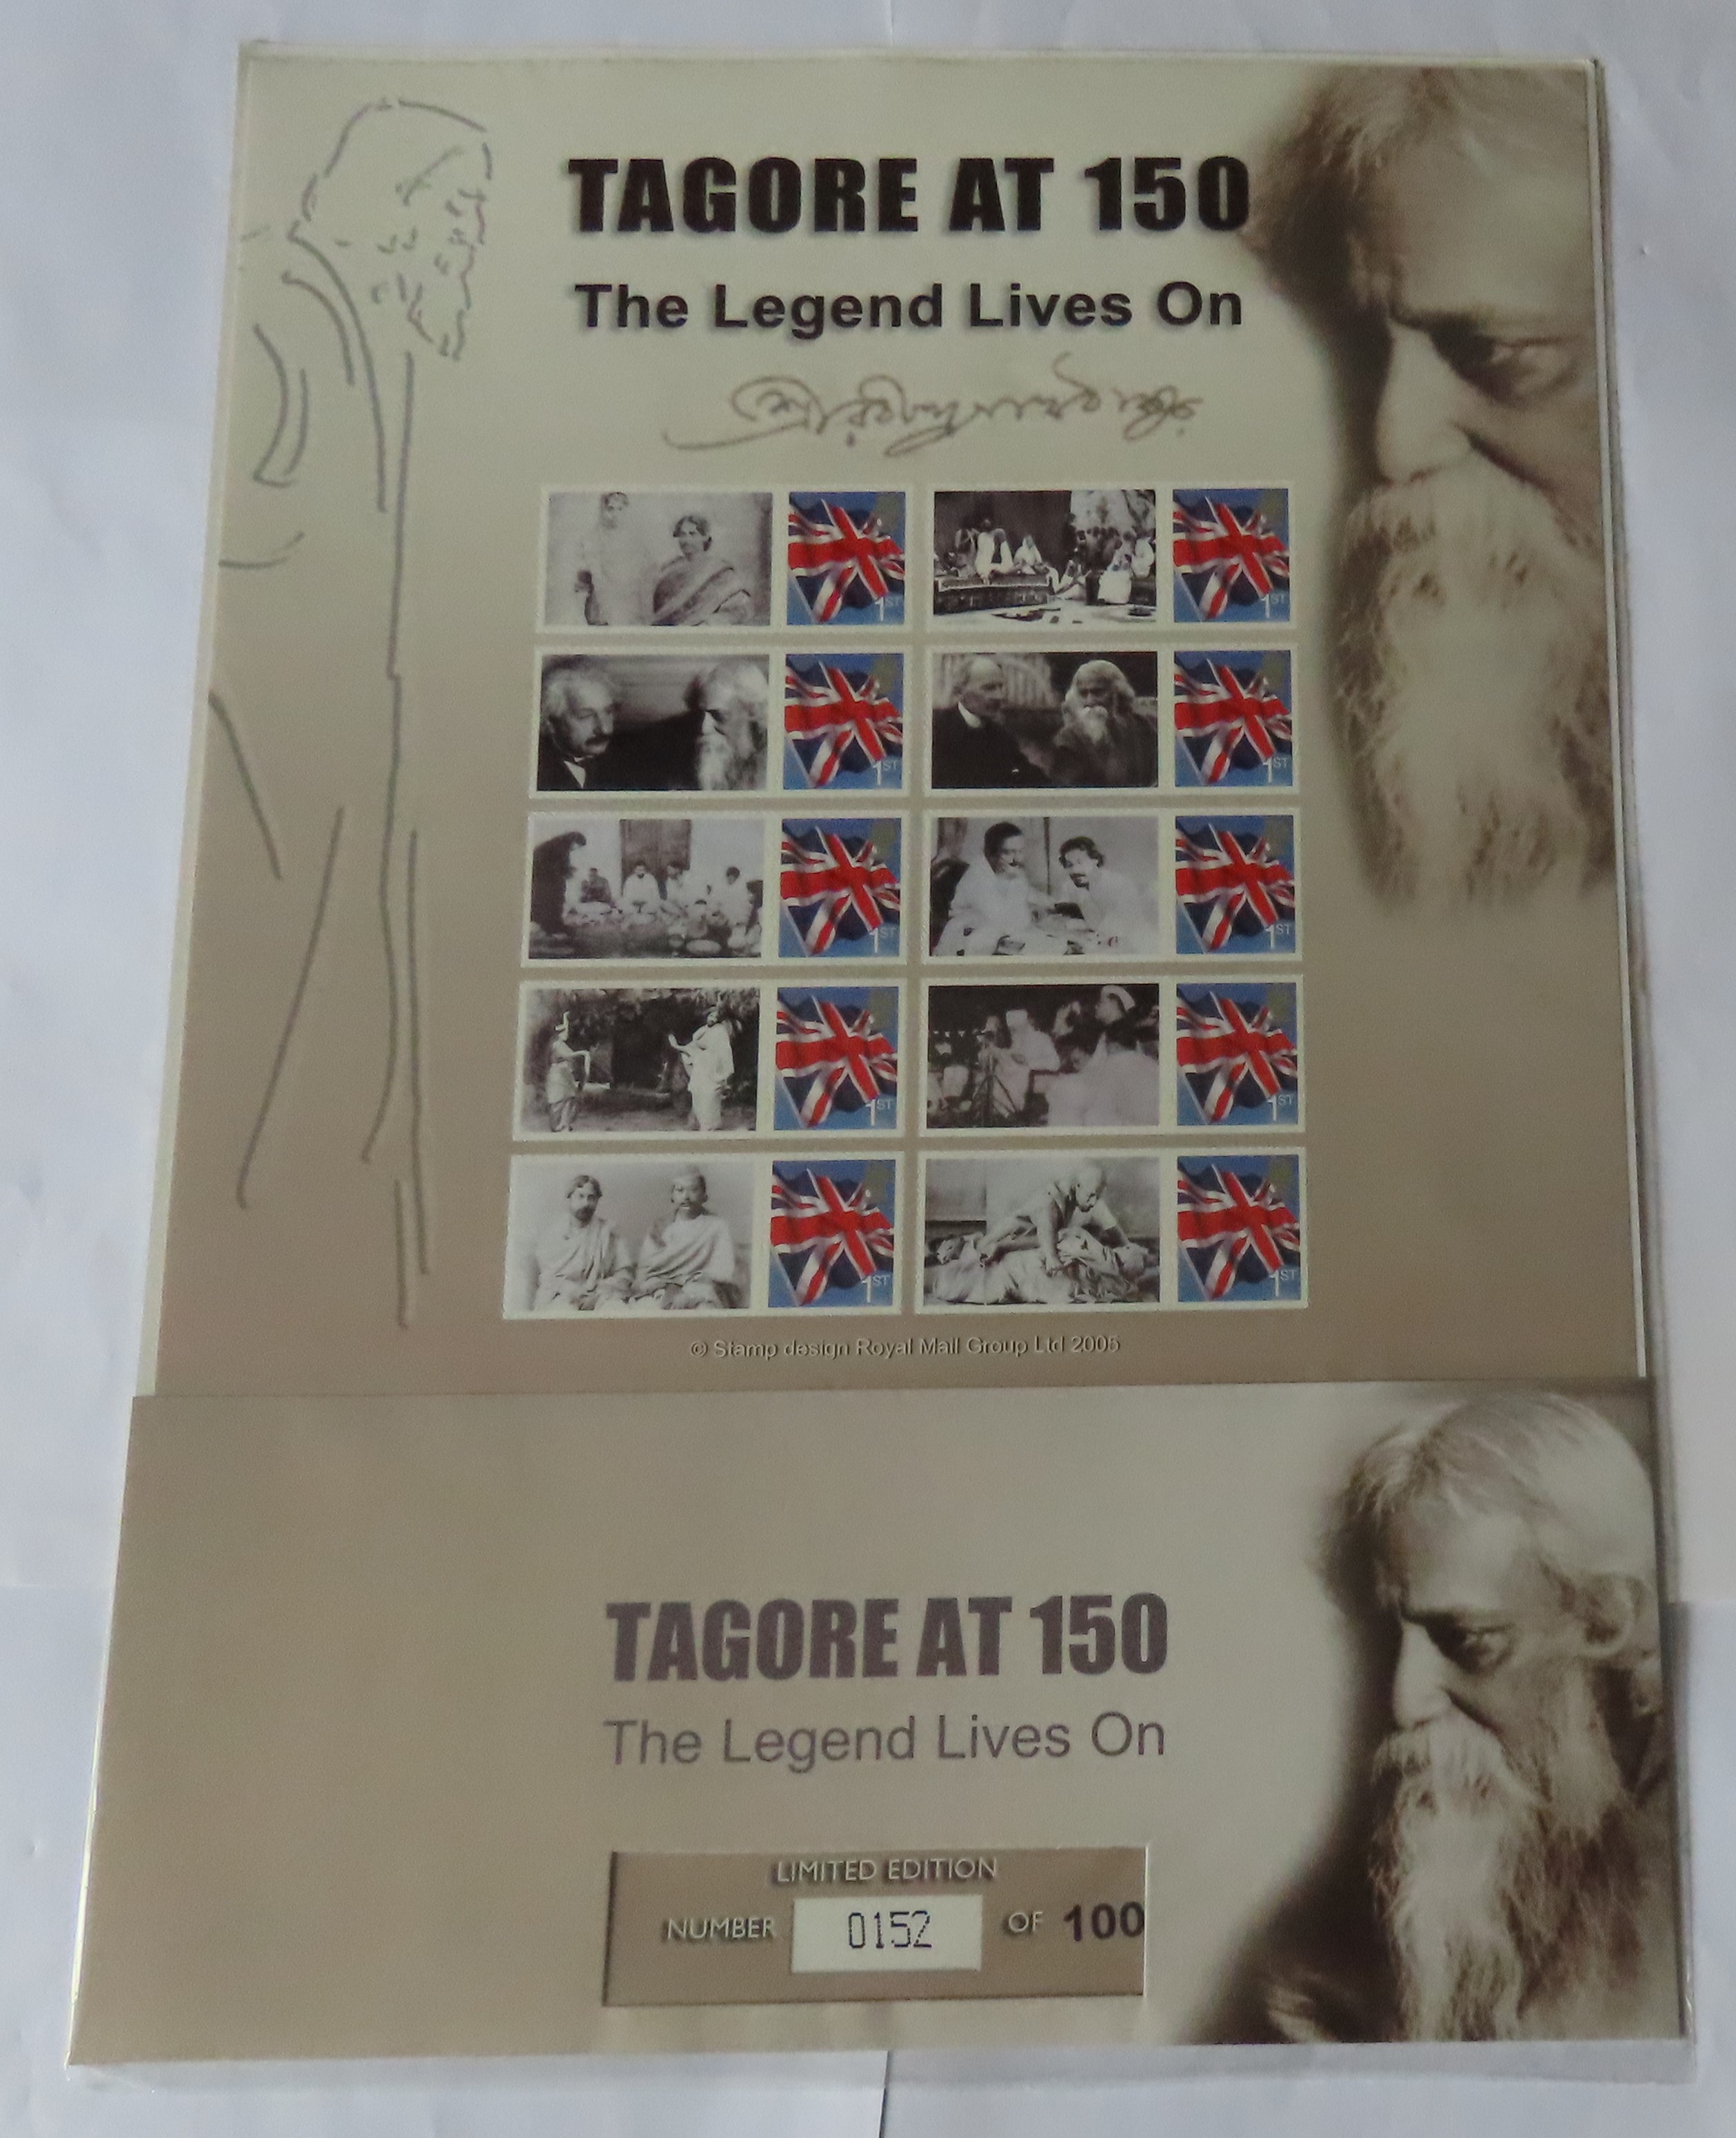 Great Britain 2010 Tagore at 150, The Legend Lives On, Royal Mail Smilers Sheet, Limited edition